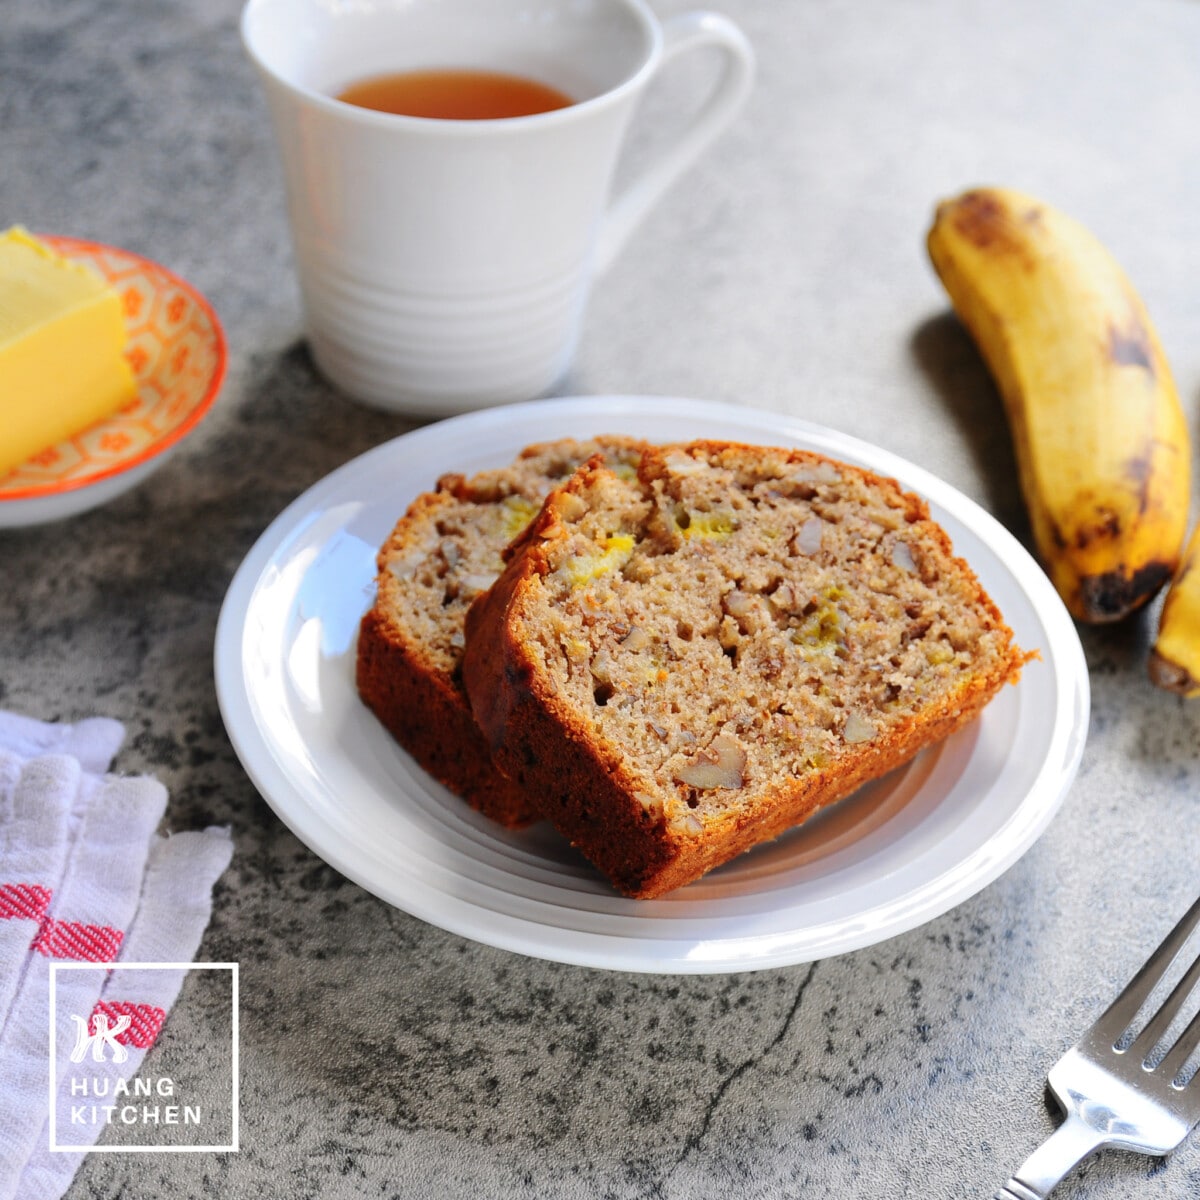 Homemade Banana Bread Recipe by Huang Kitchen - Served with Butter